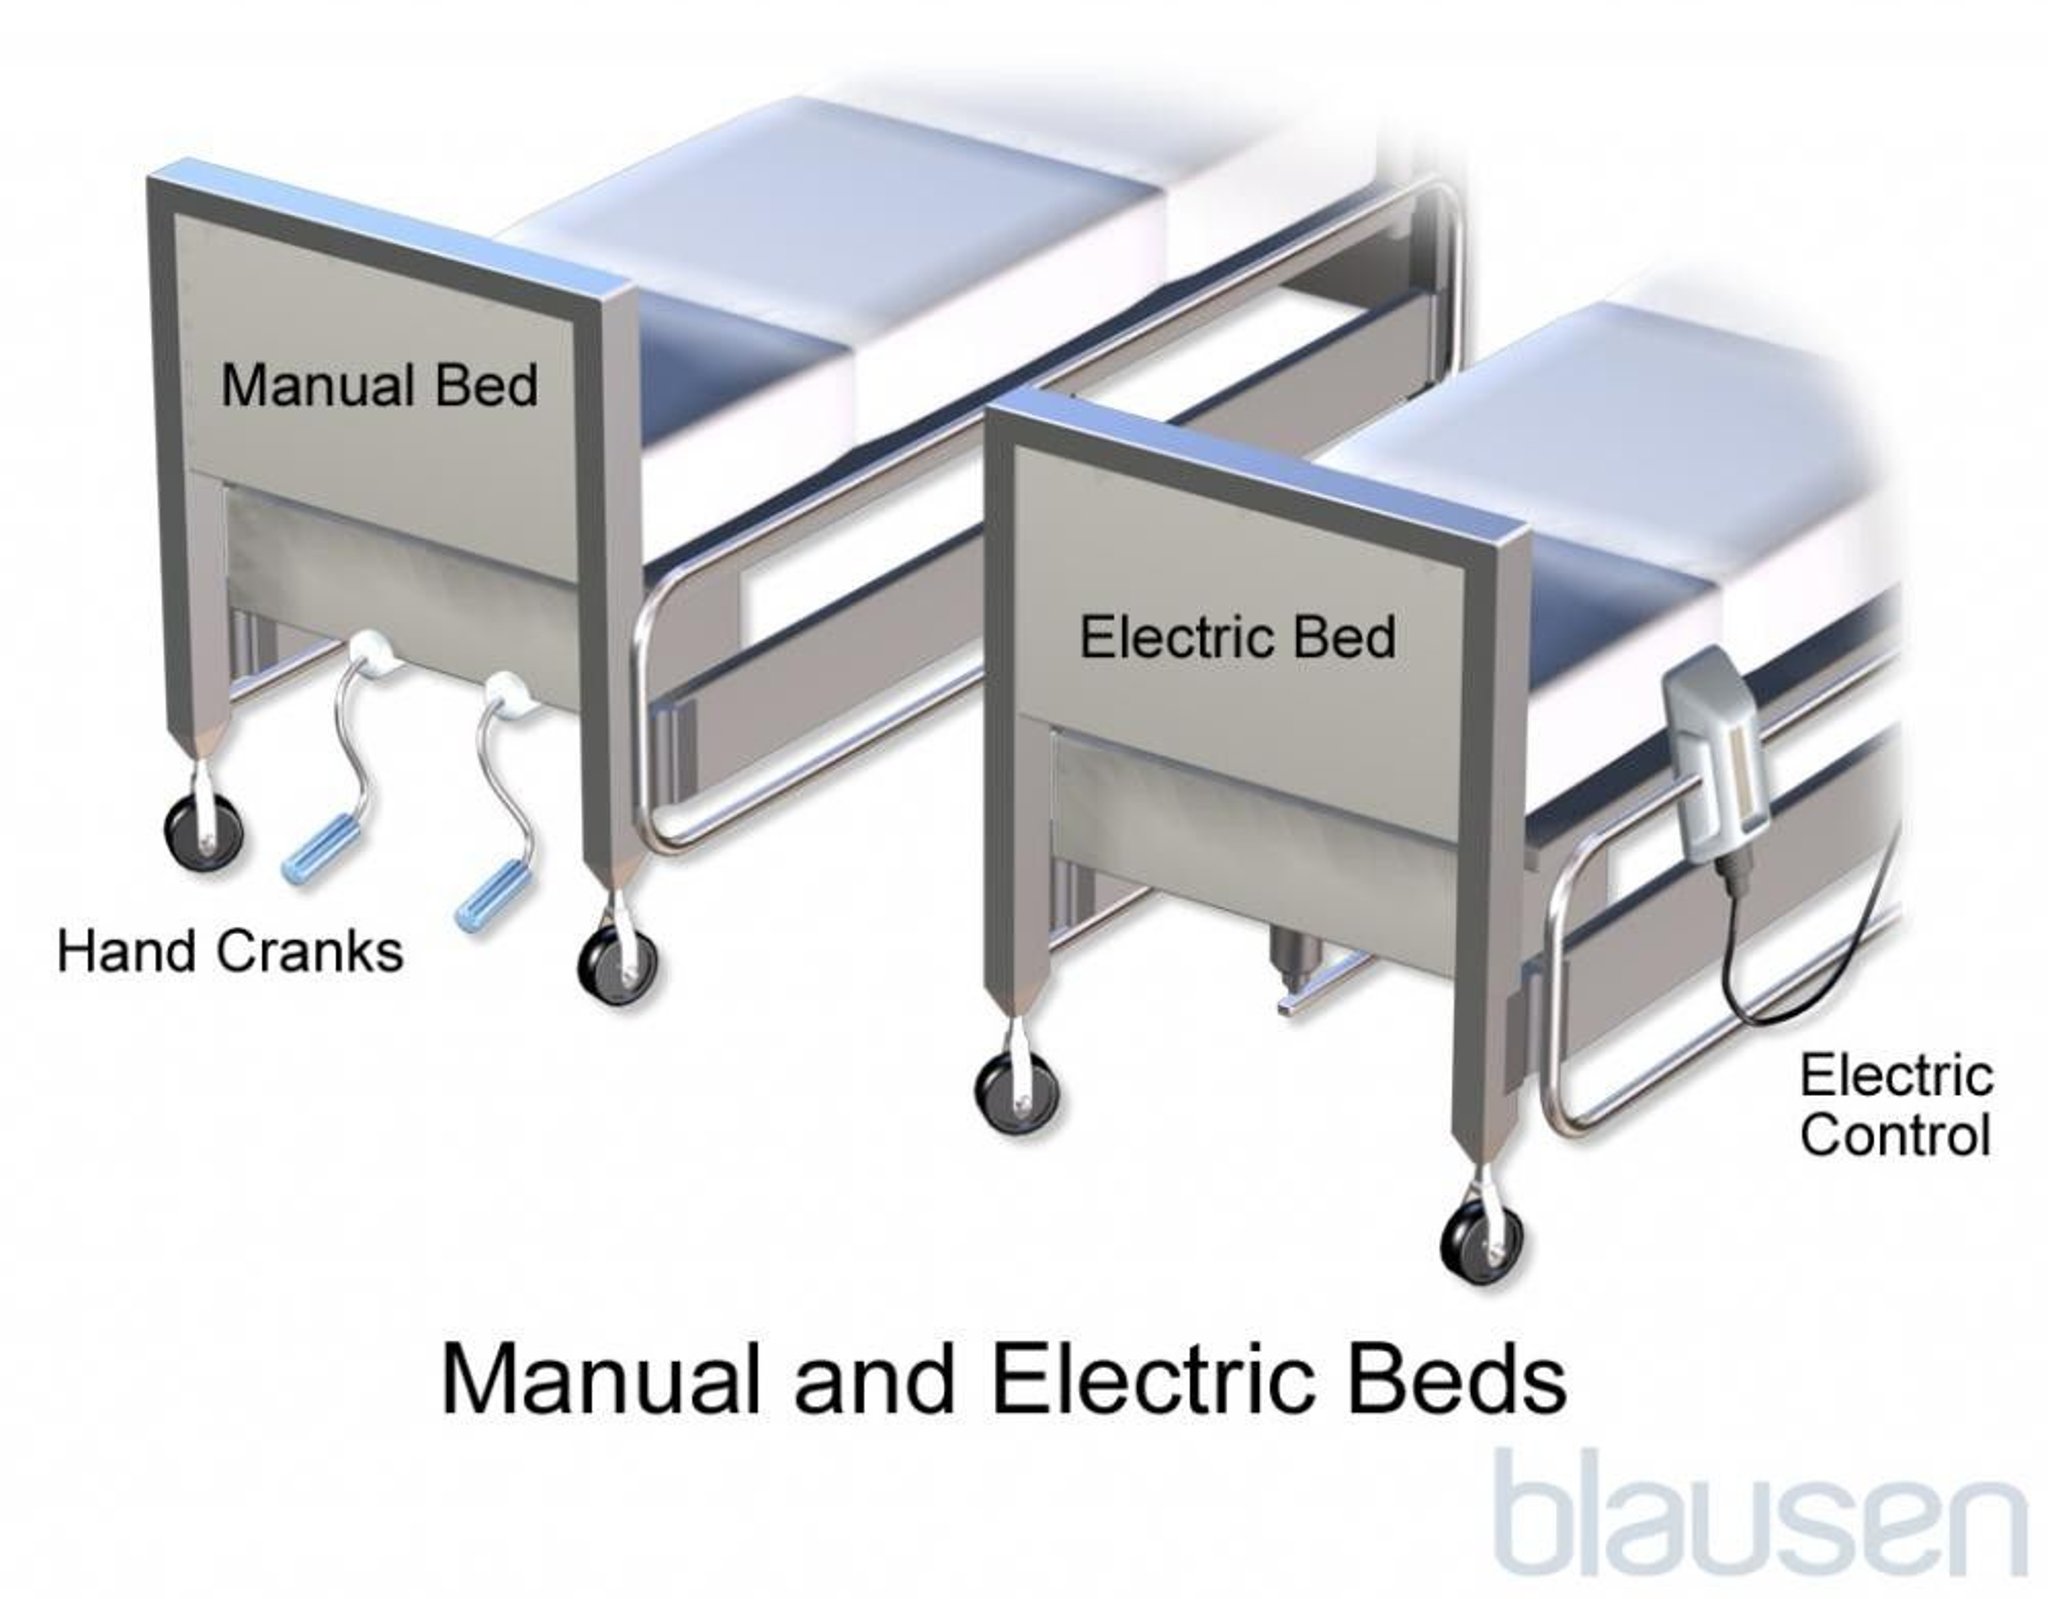 Manual and Electric Beds